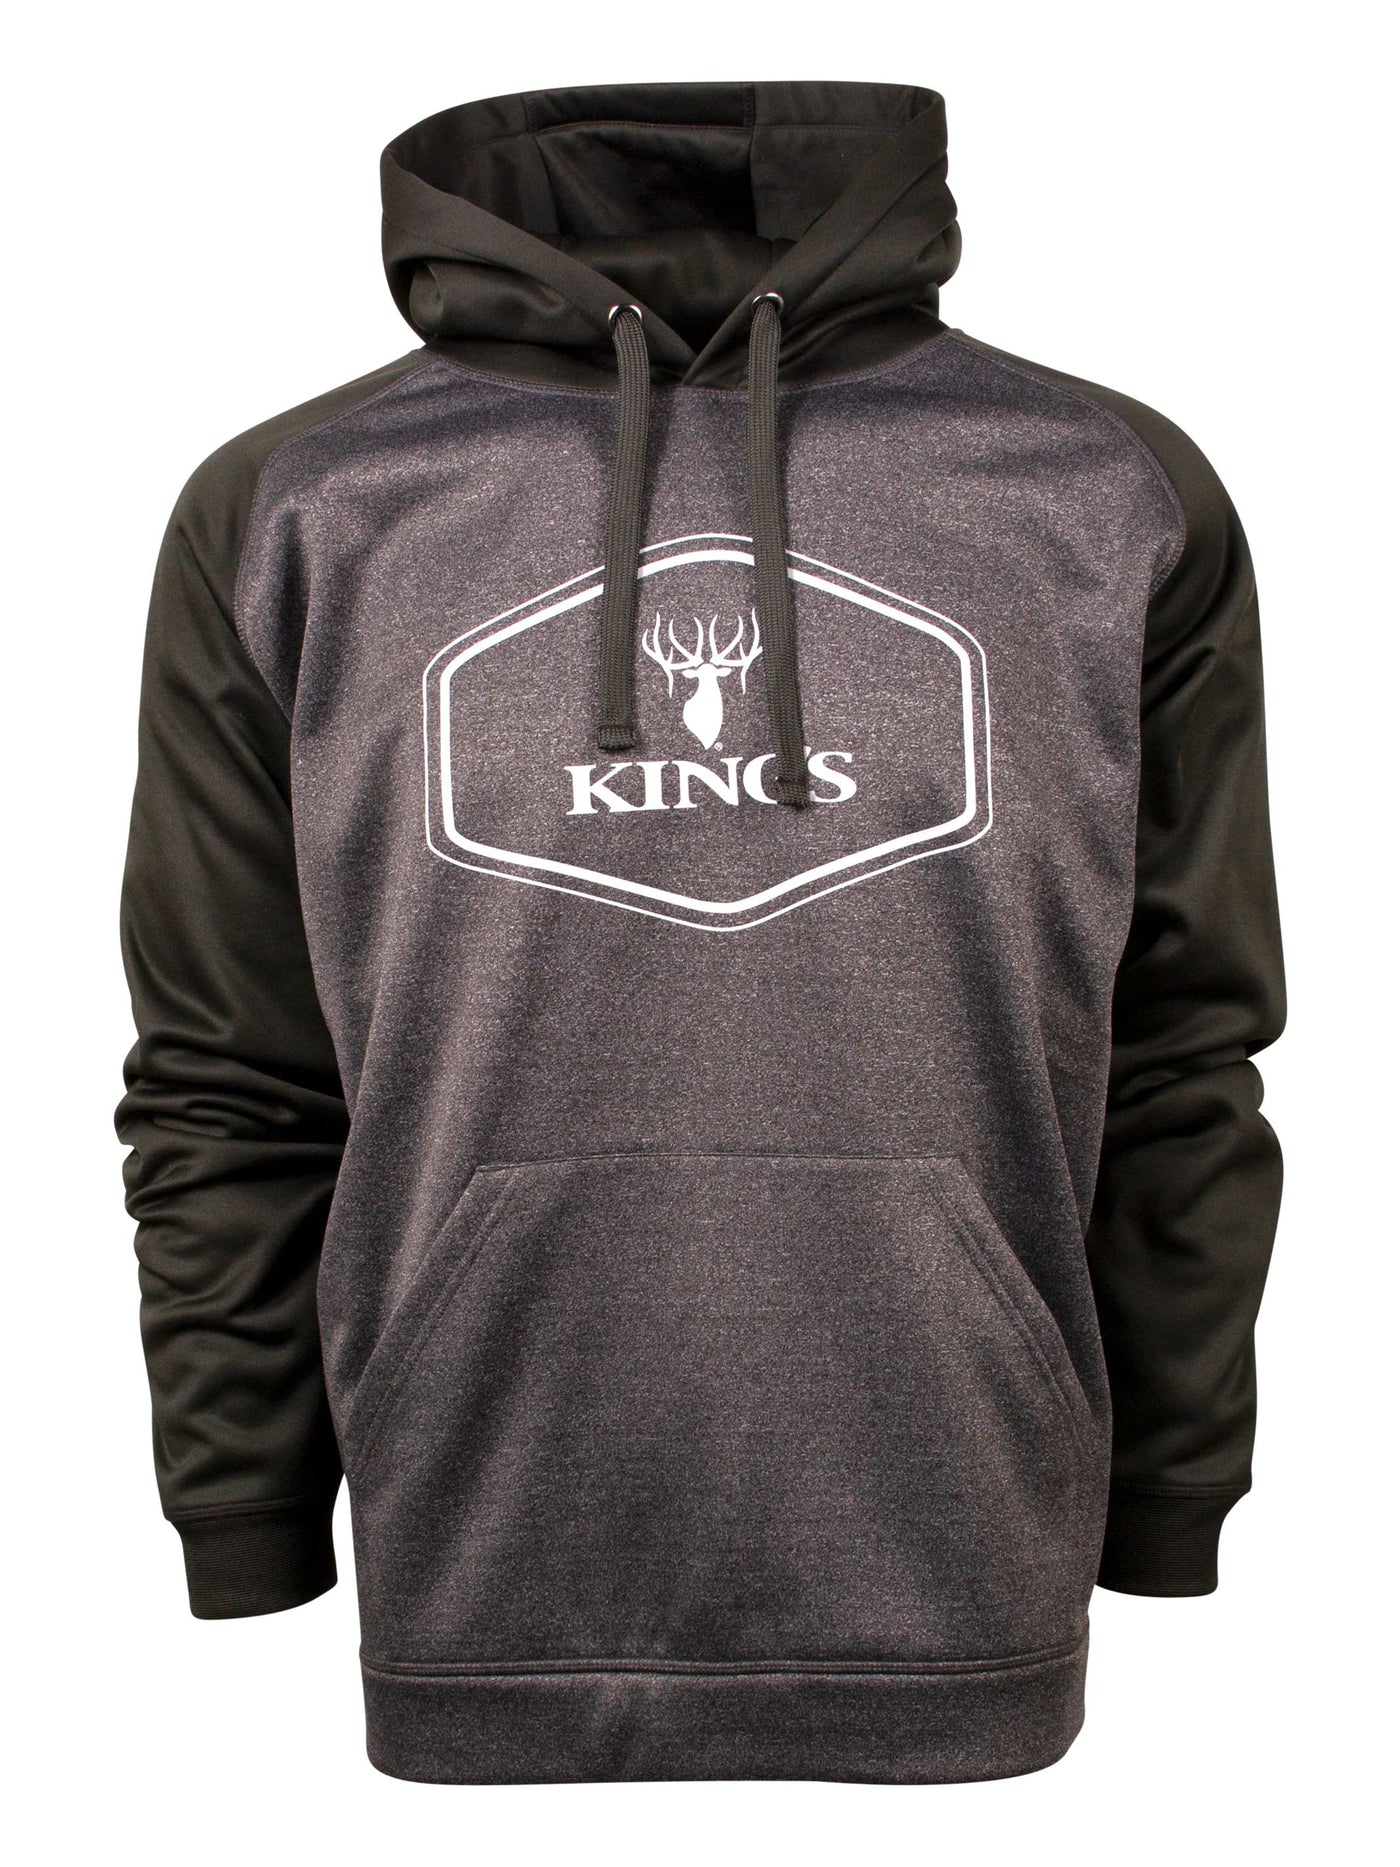 King's Lifestyle Poly Hoodie in Black | Corbotras lochi